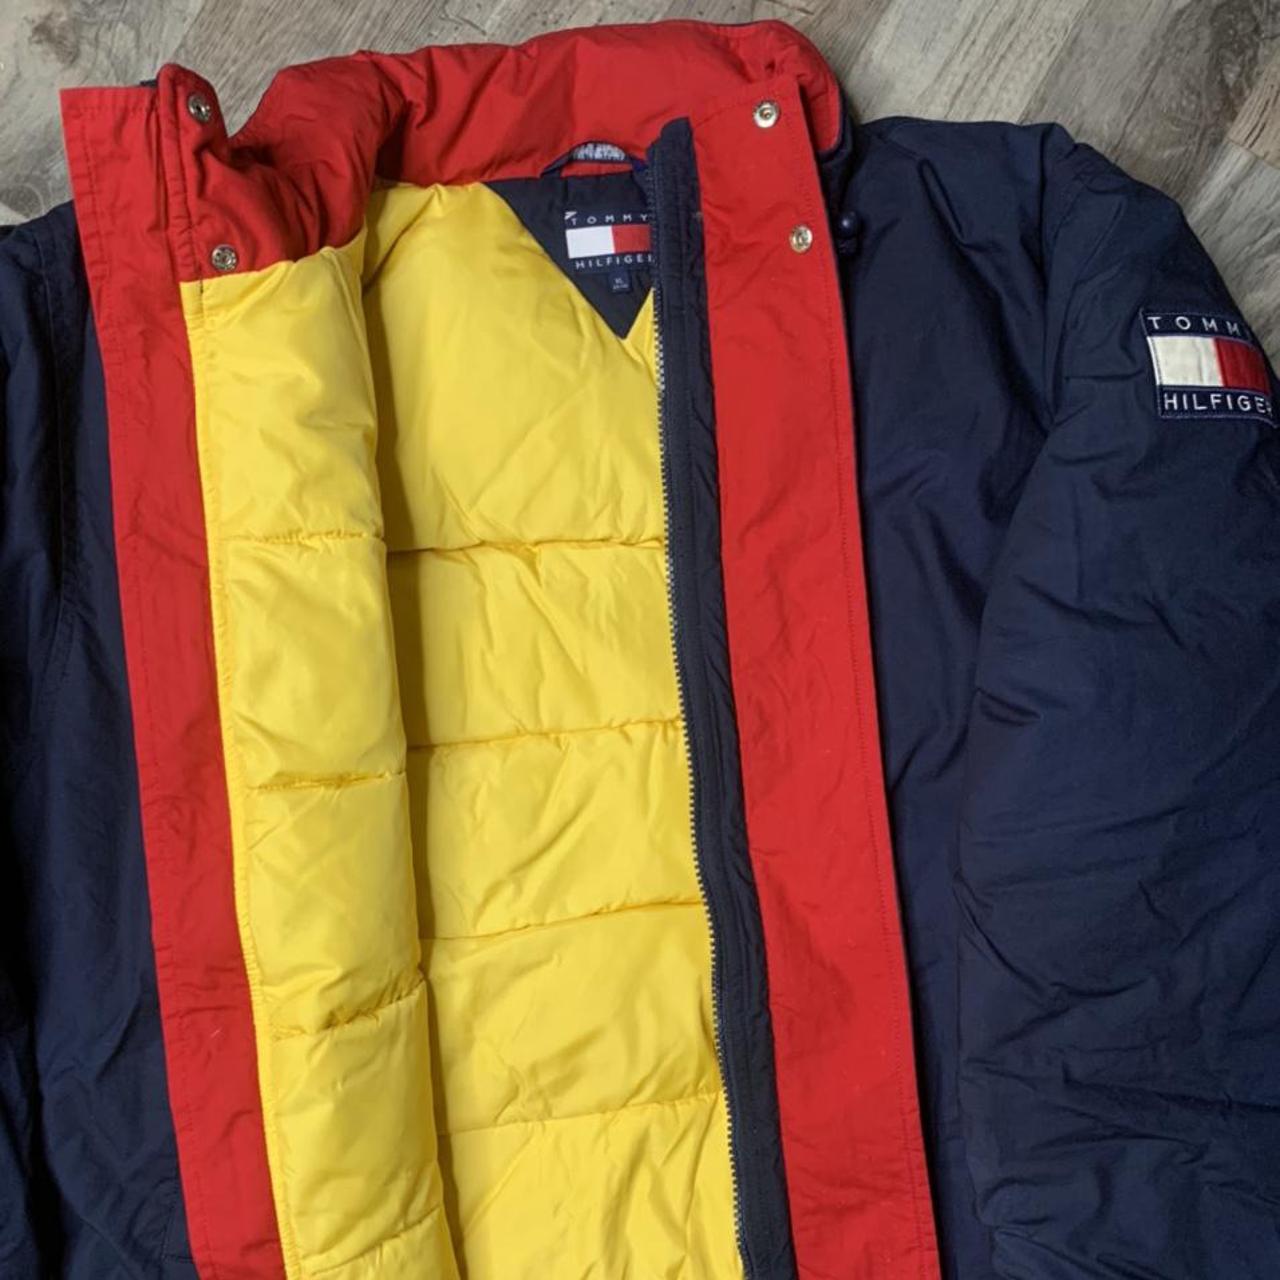 Tommy Hilfiger Men's Navy and Red Jacket (4)